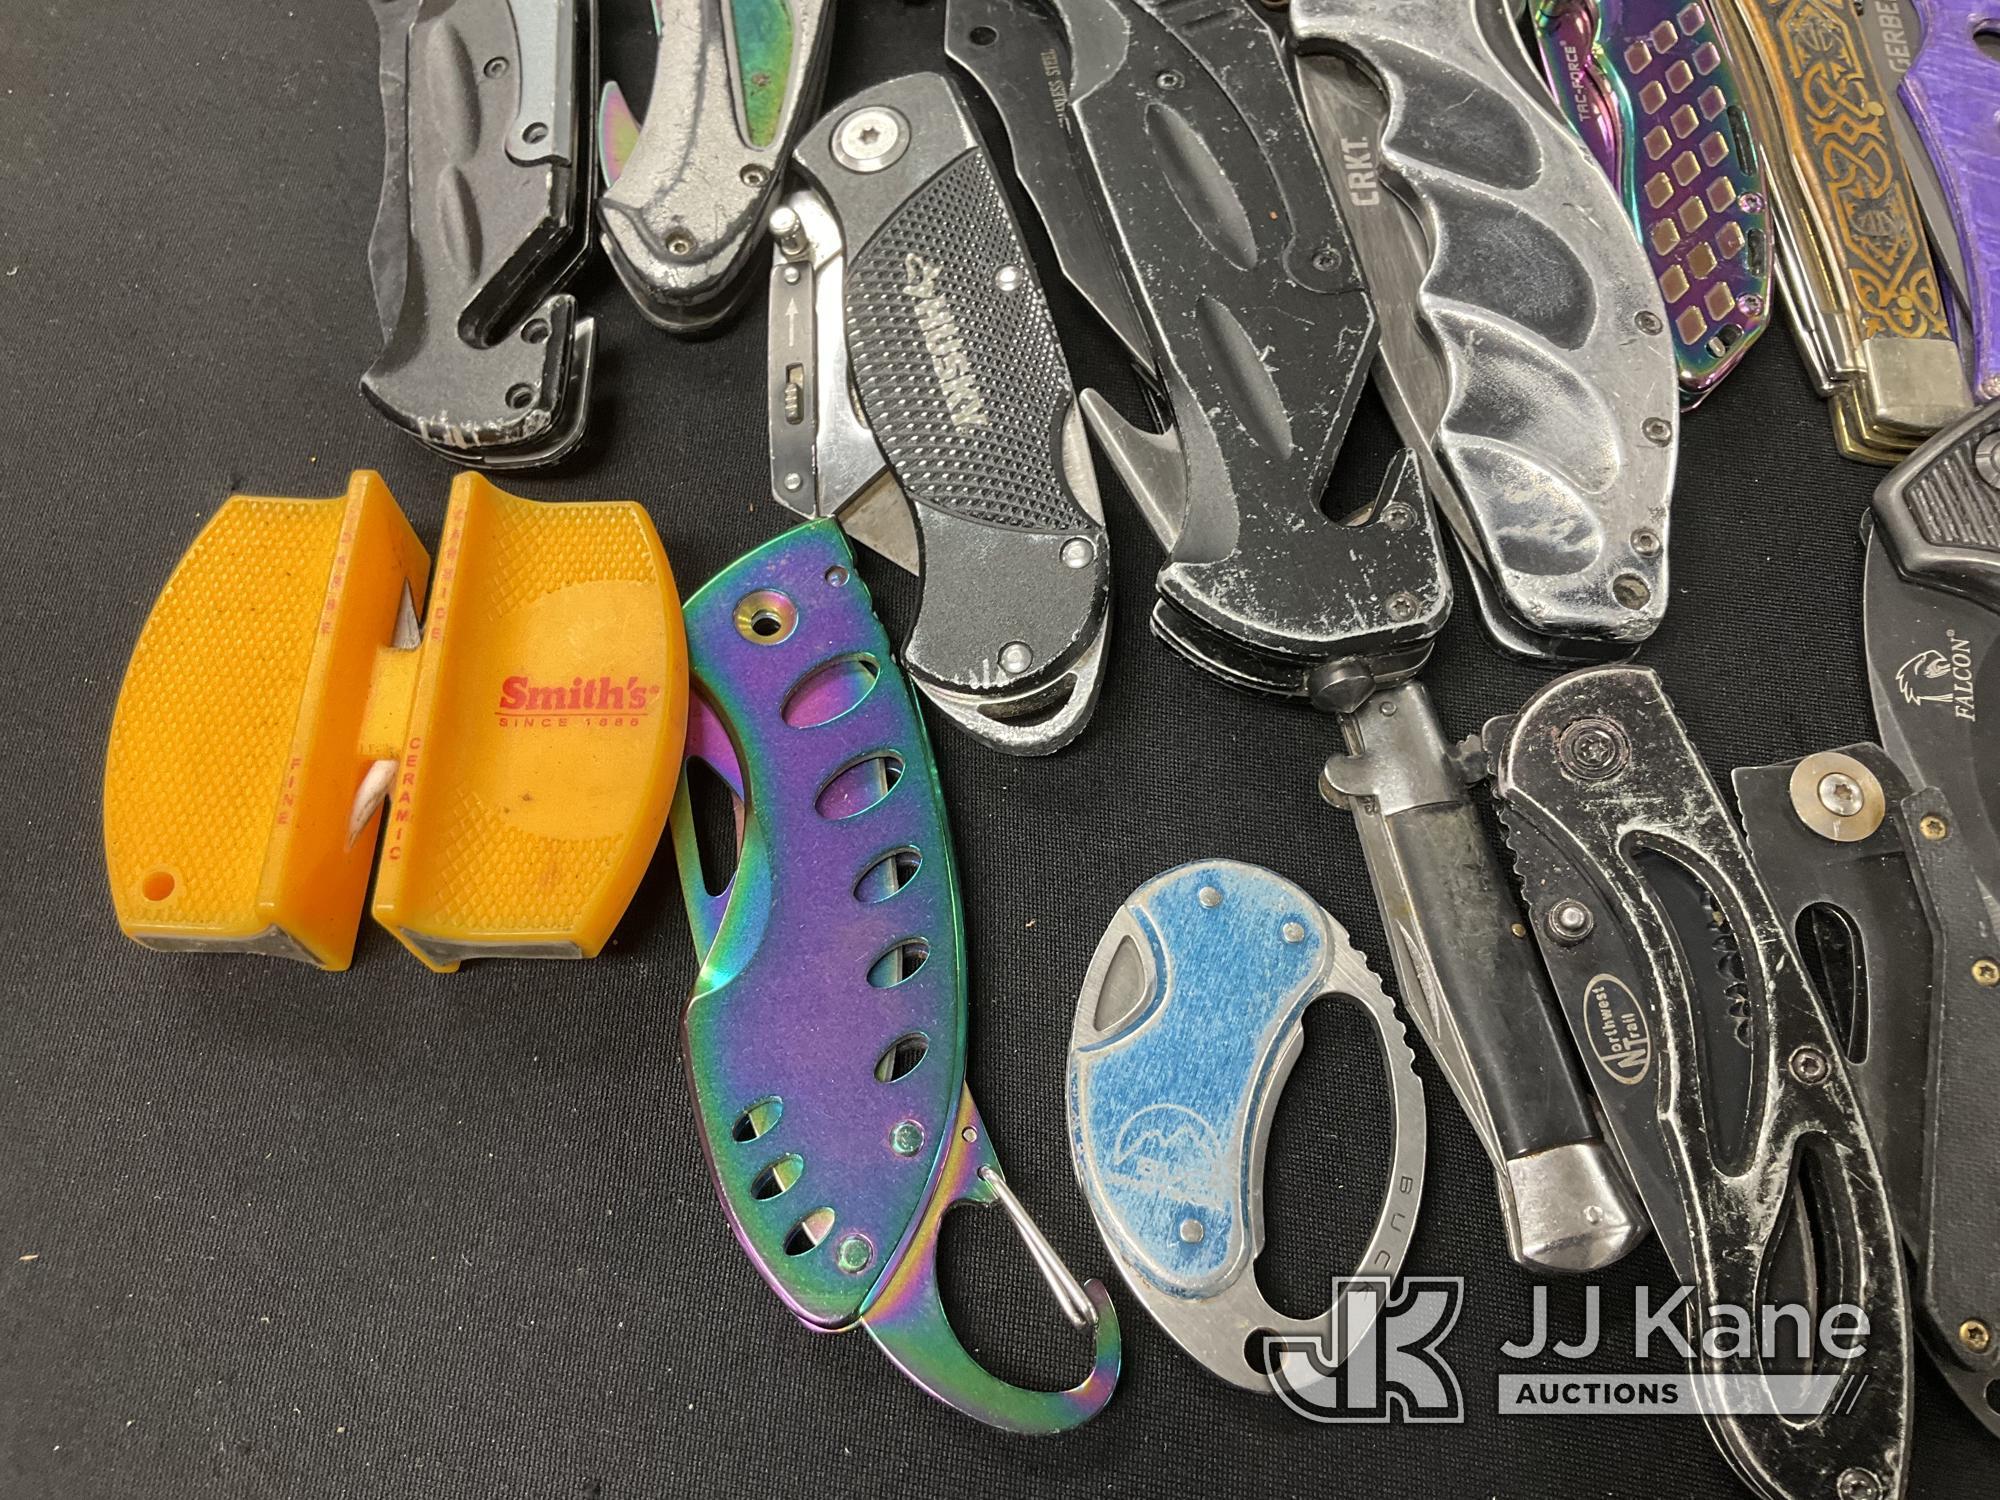 (Jurupa Valley, CA) Knives (Used) NOTE: This unit is being sold AS IS/WHERE IS via Timed Auction and